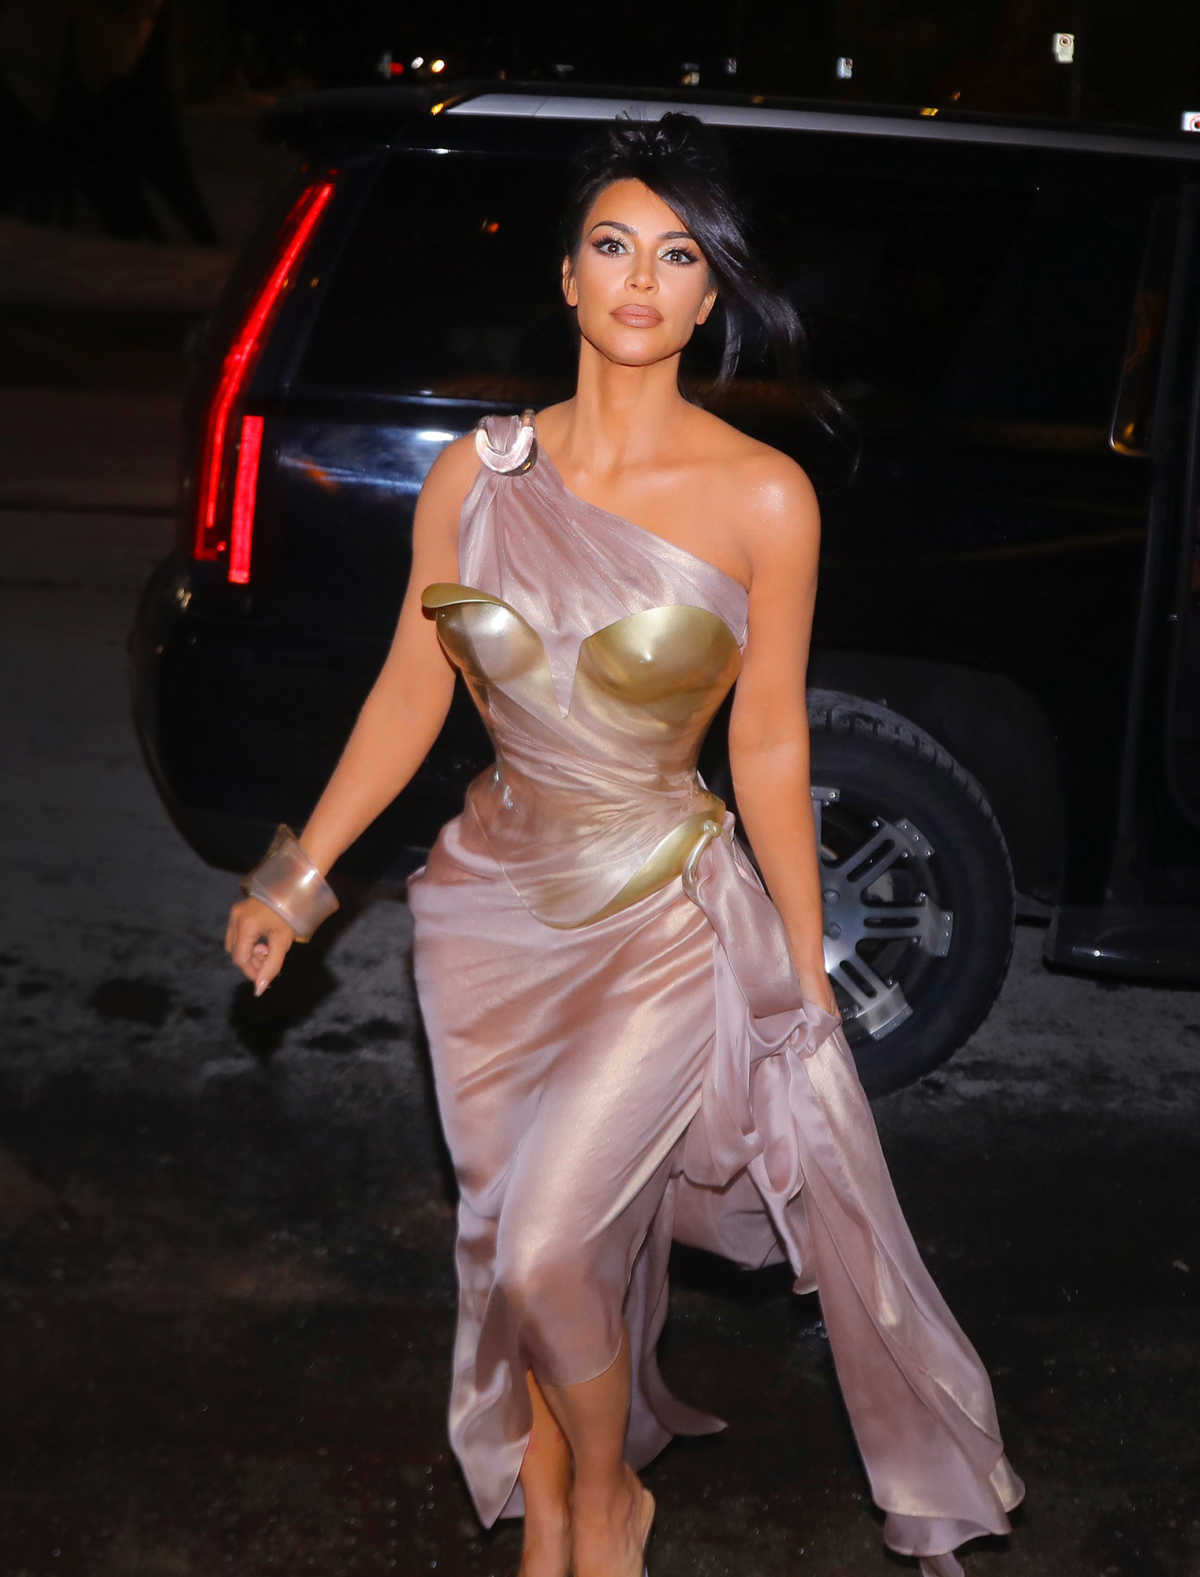 Kim looked amazing in this dress.